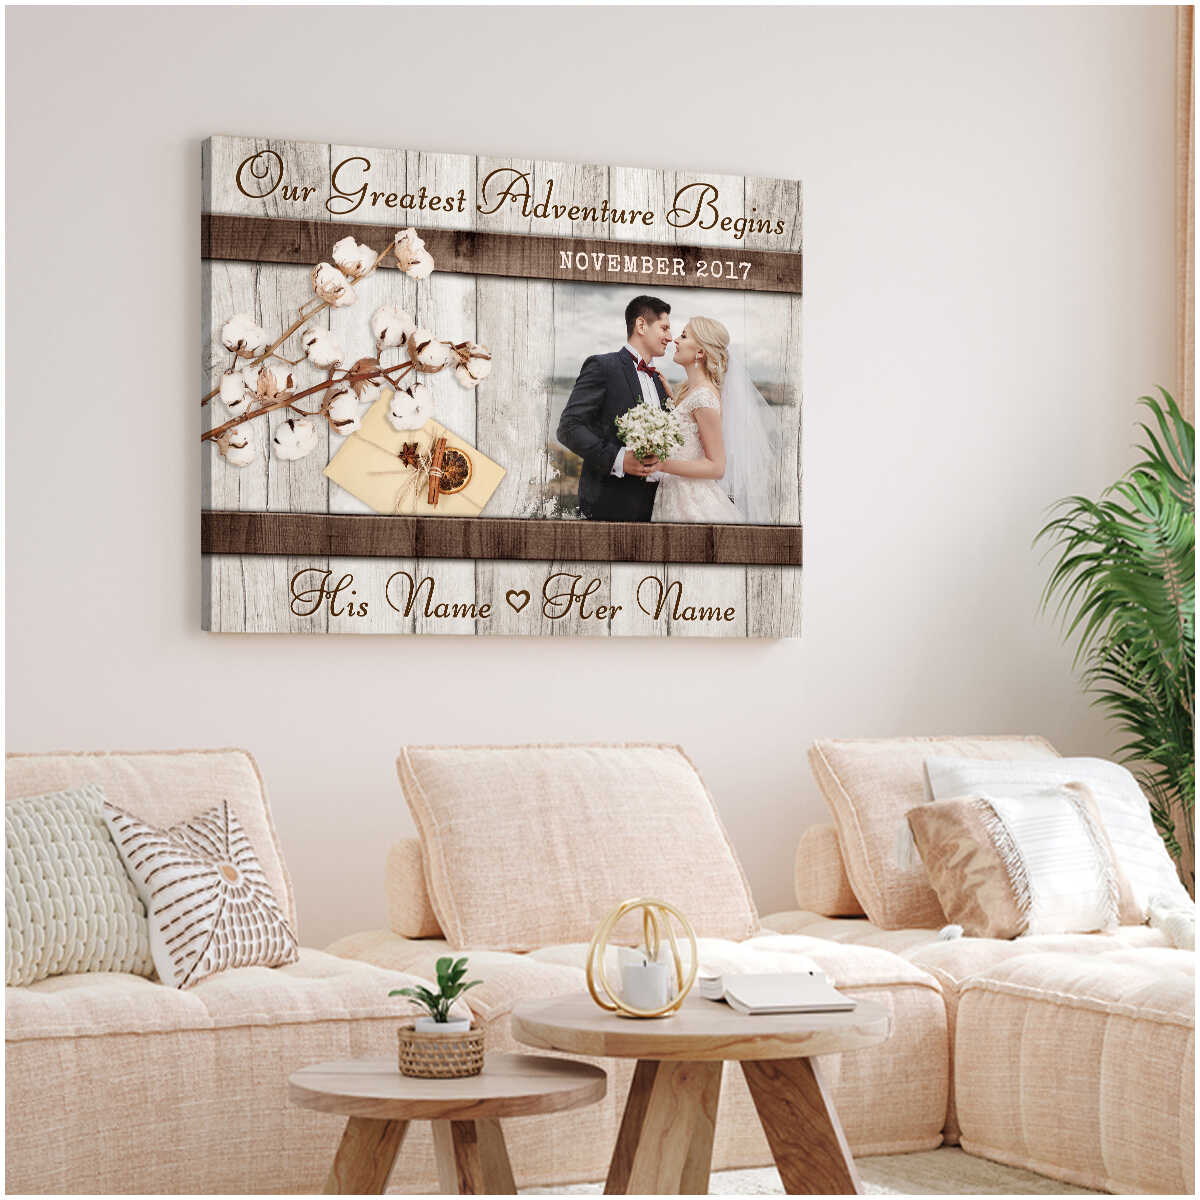 Custom Canvas Prints Wedding Anniversary Gifts Personalized Photo Gifts Our Greatest Adventure Begins 1